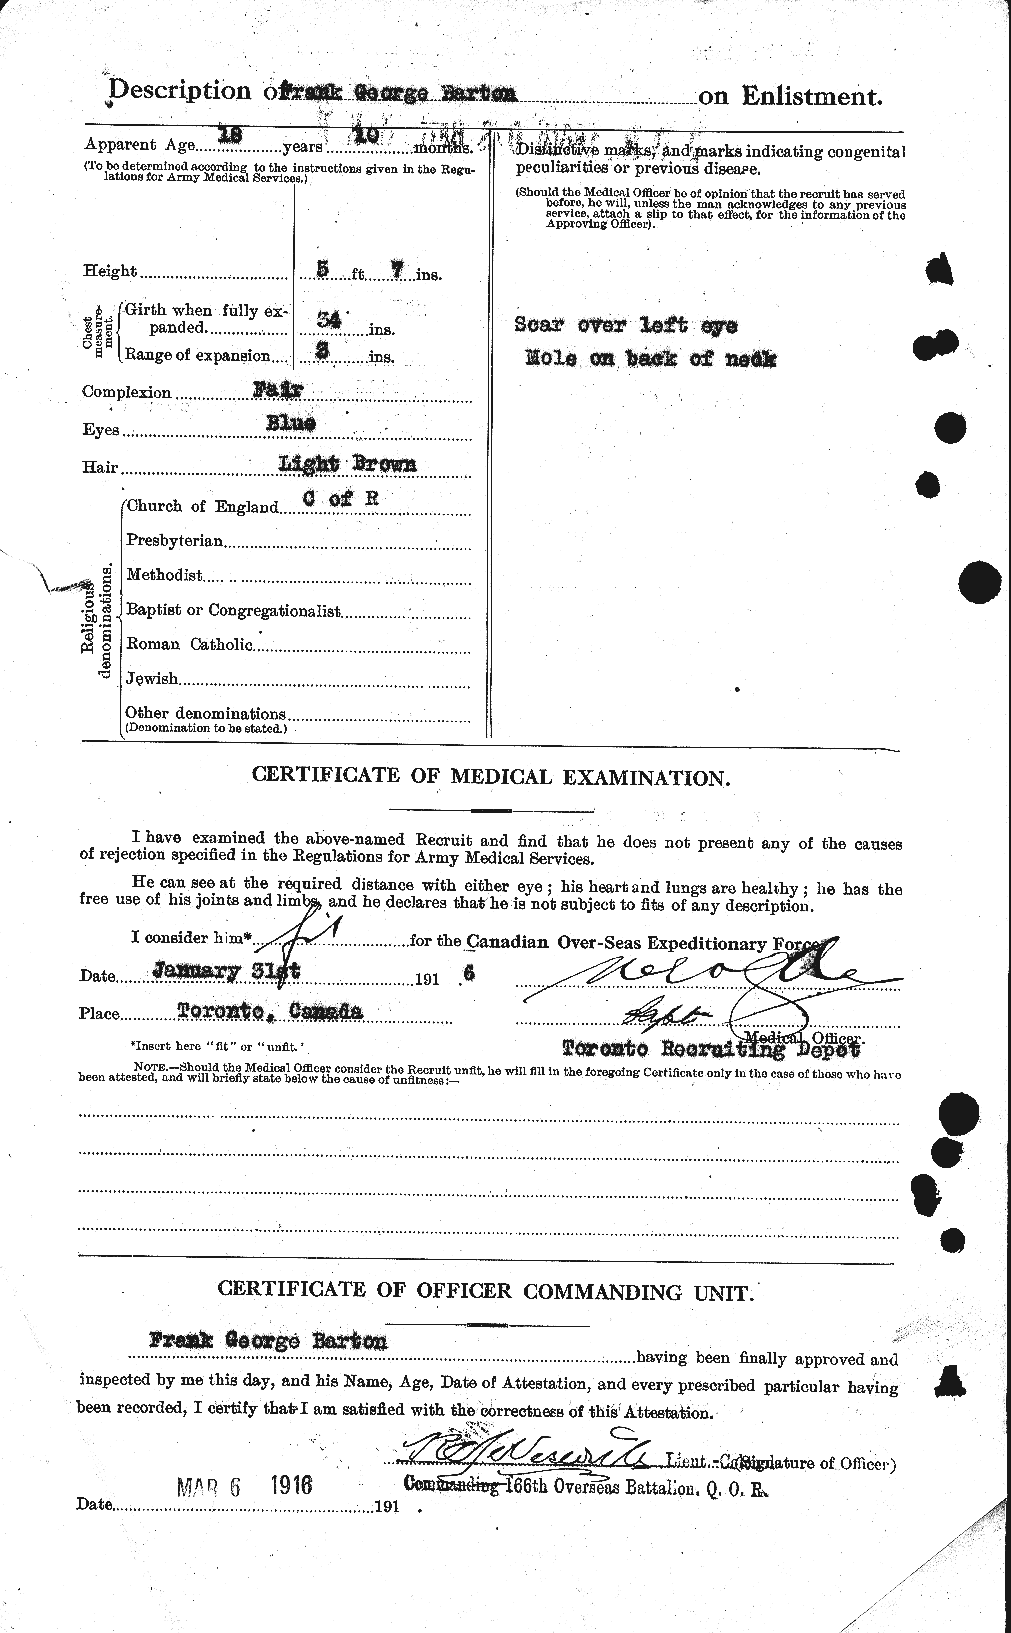 Personnel Records of the First World War - CEF 221673b